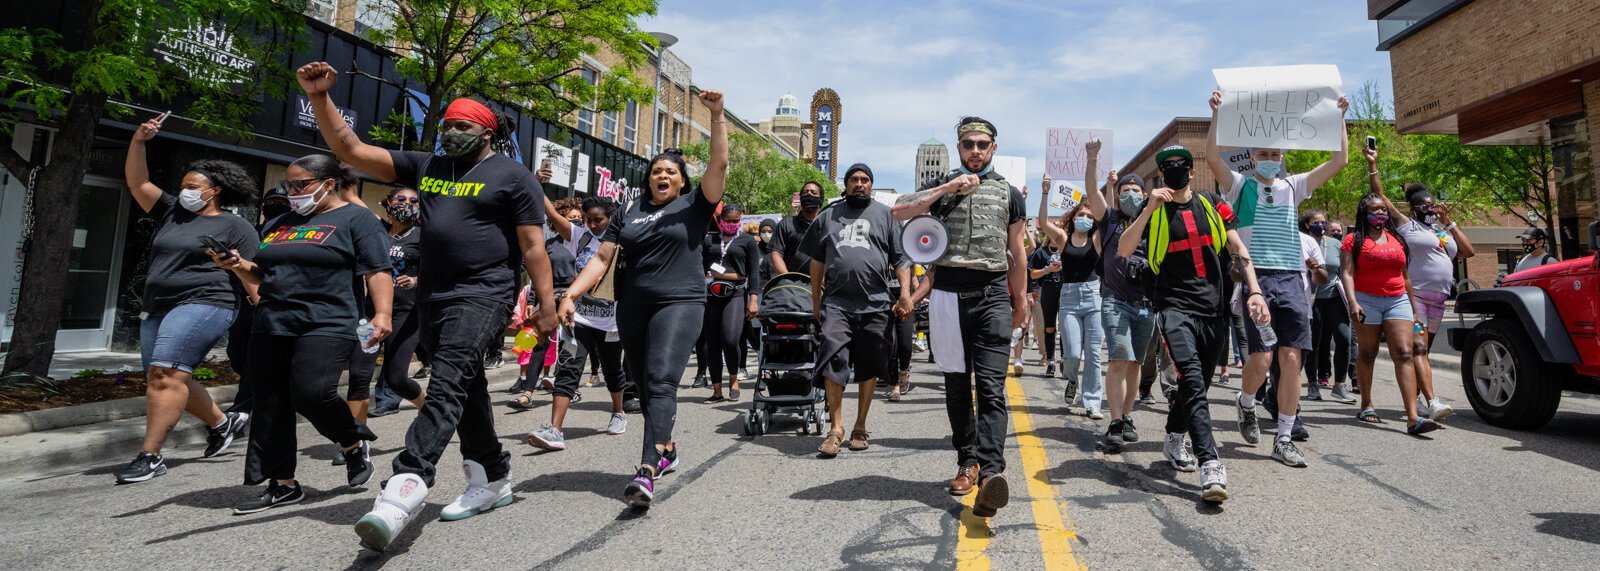 Protestors march through downtown Ann Arbor on June 1.